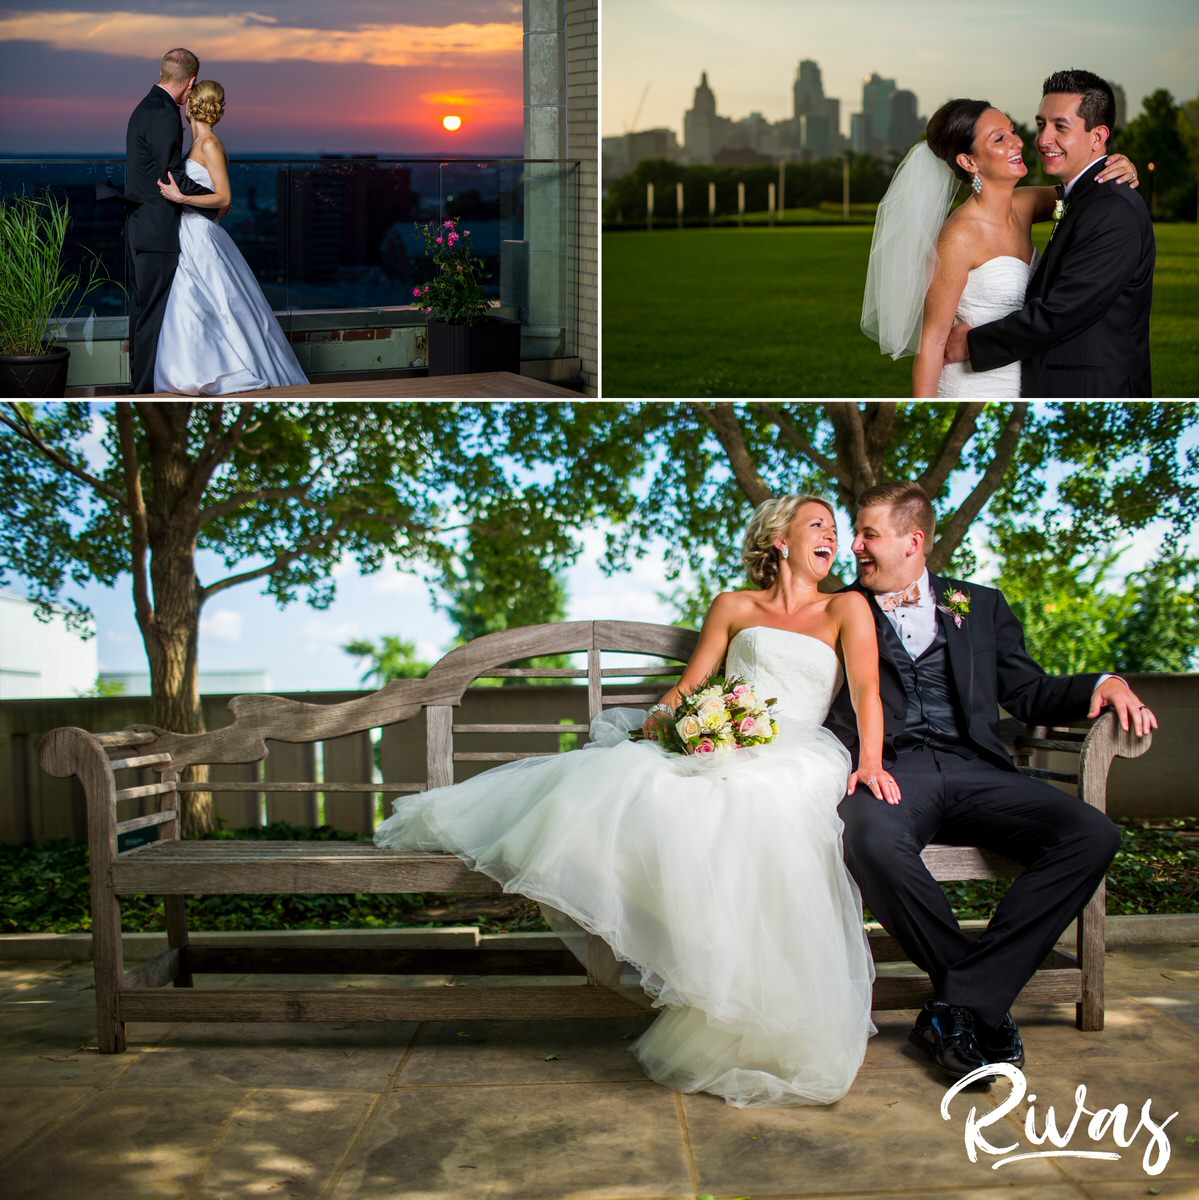 10 Years | A group of three wedding photos from three different couples during their portrait session on their wedding day in Kansas City.